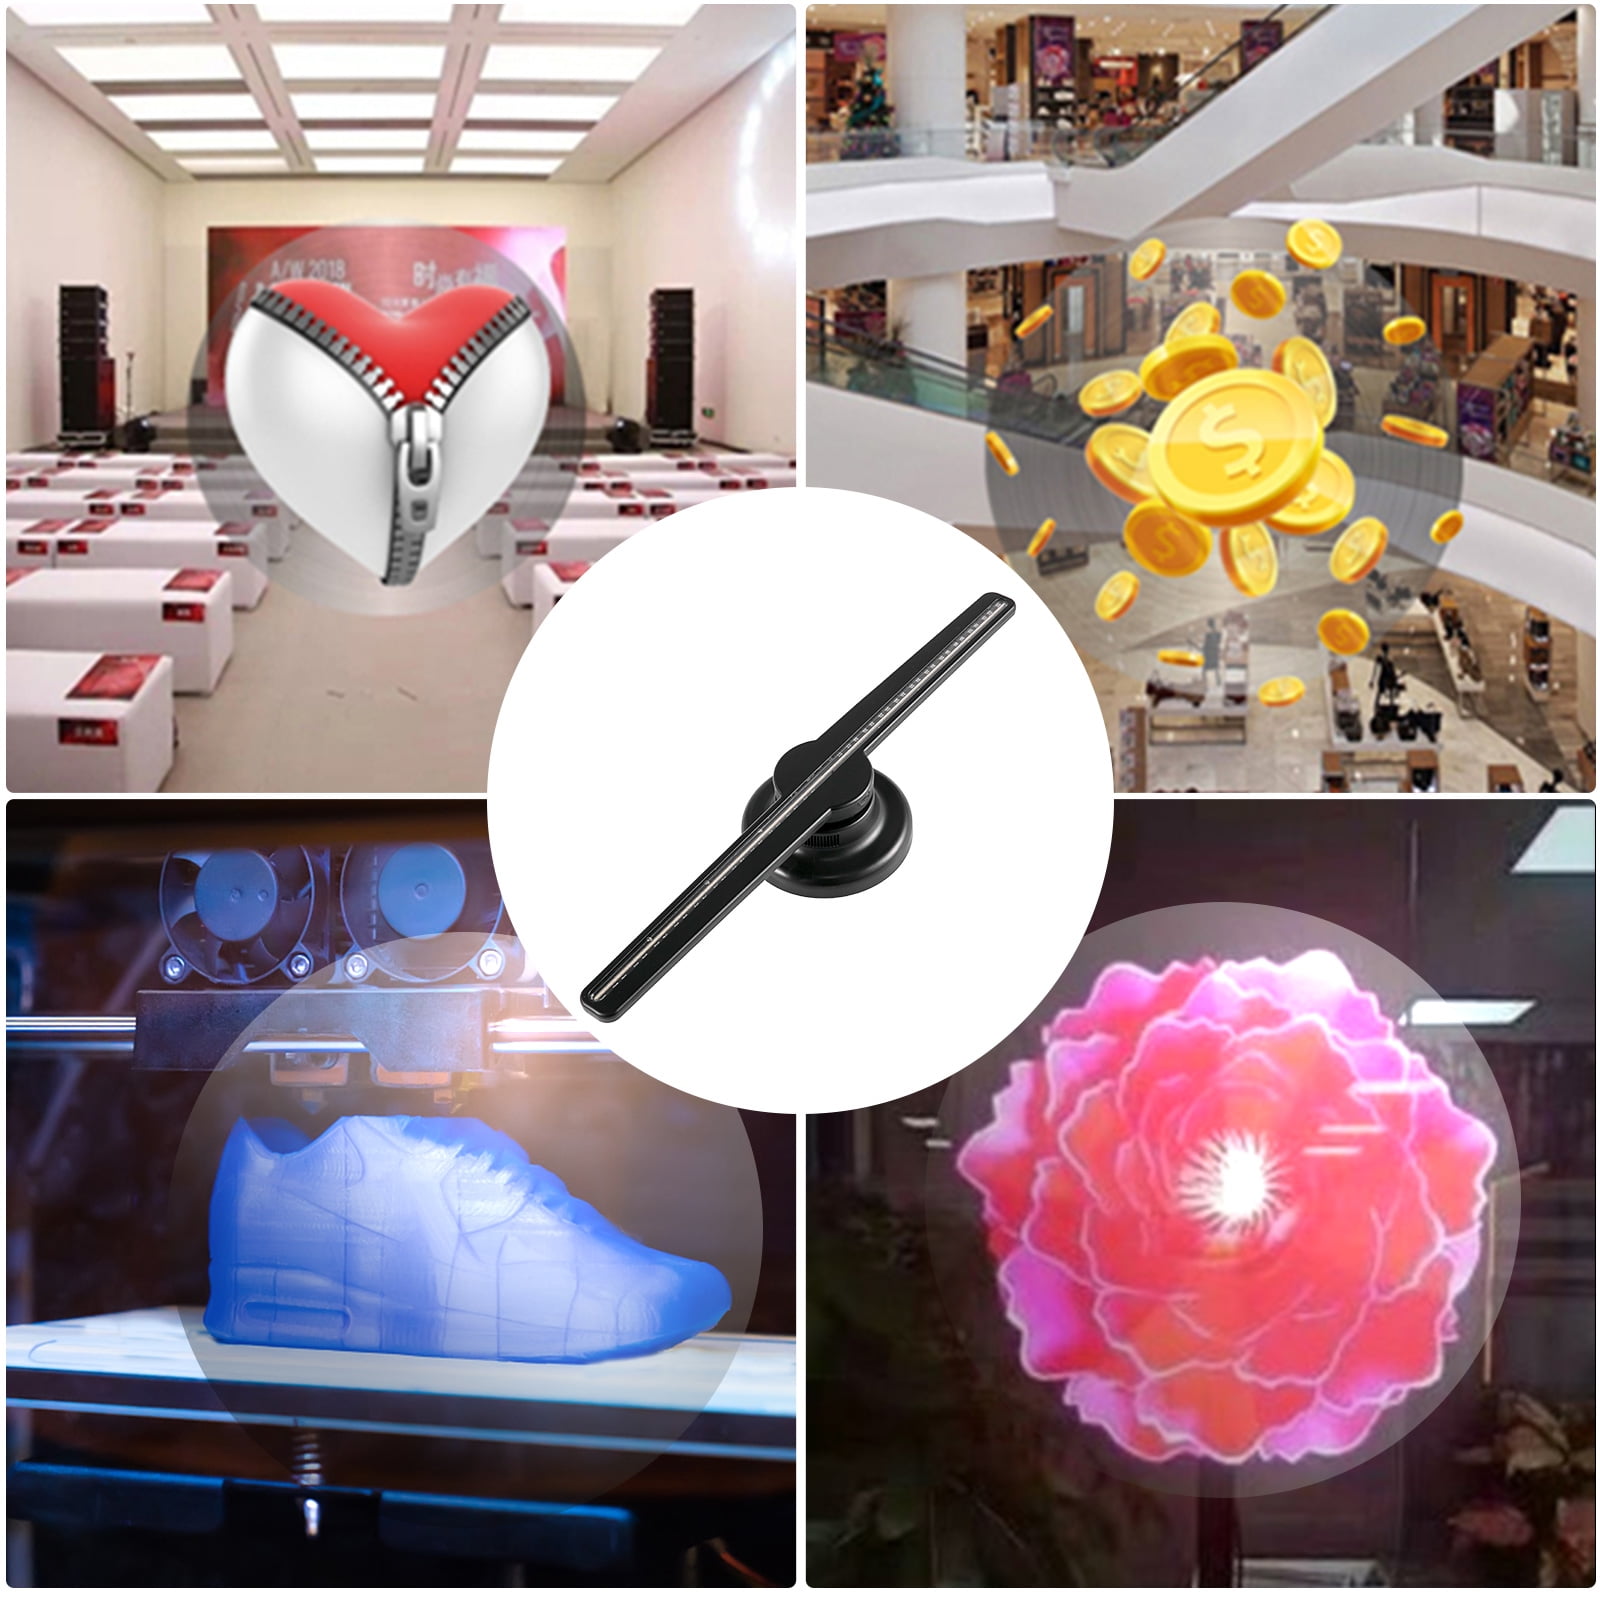 3D Holographic Projector Player Fan 224 LEDs Advertising Displayer US 42cm 